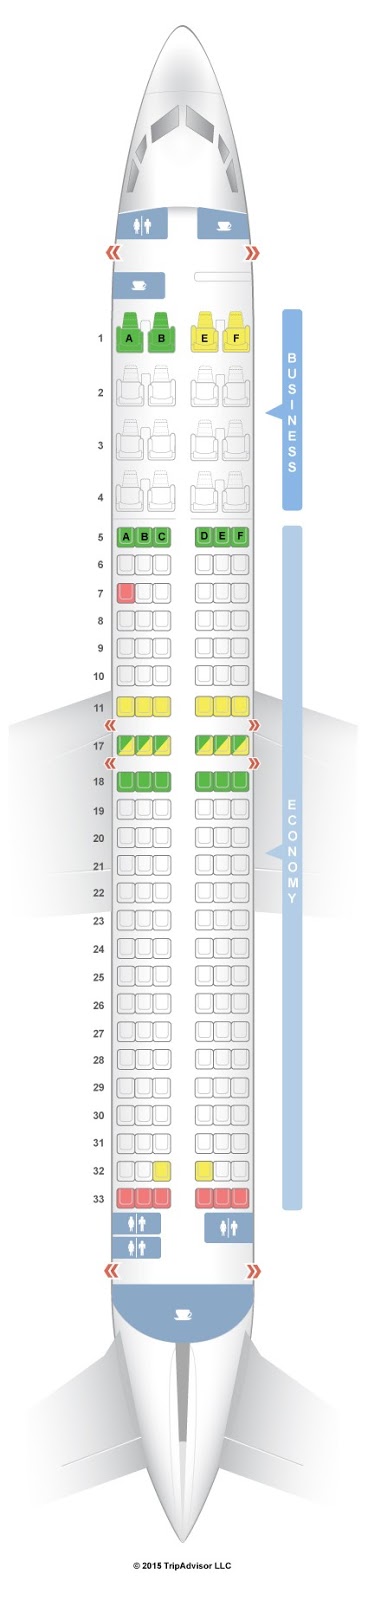 Seating Chart For American Airlines Boeing 737 800